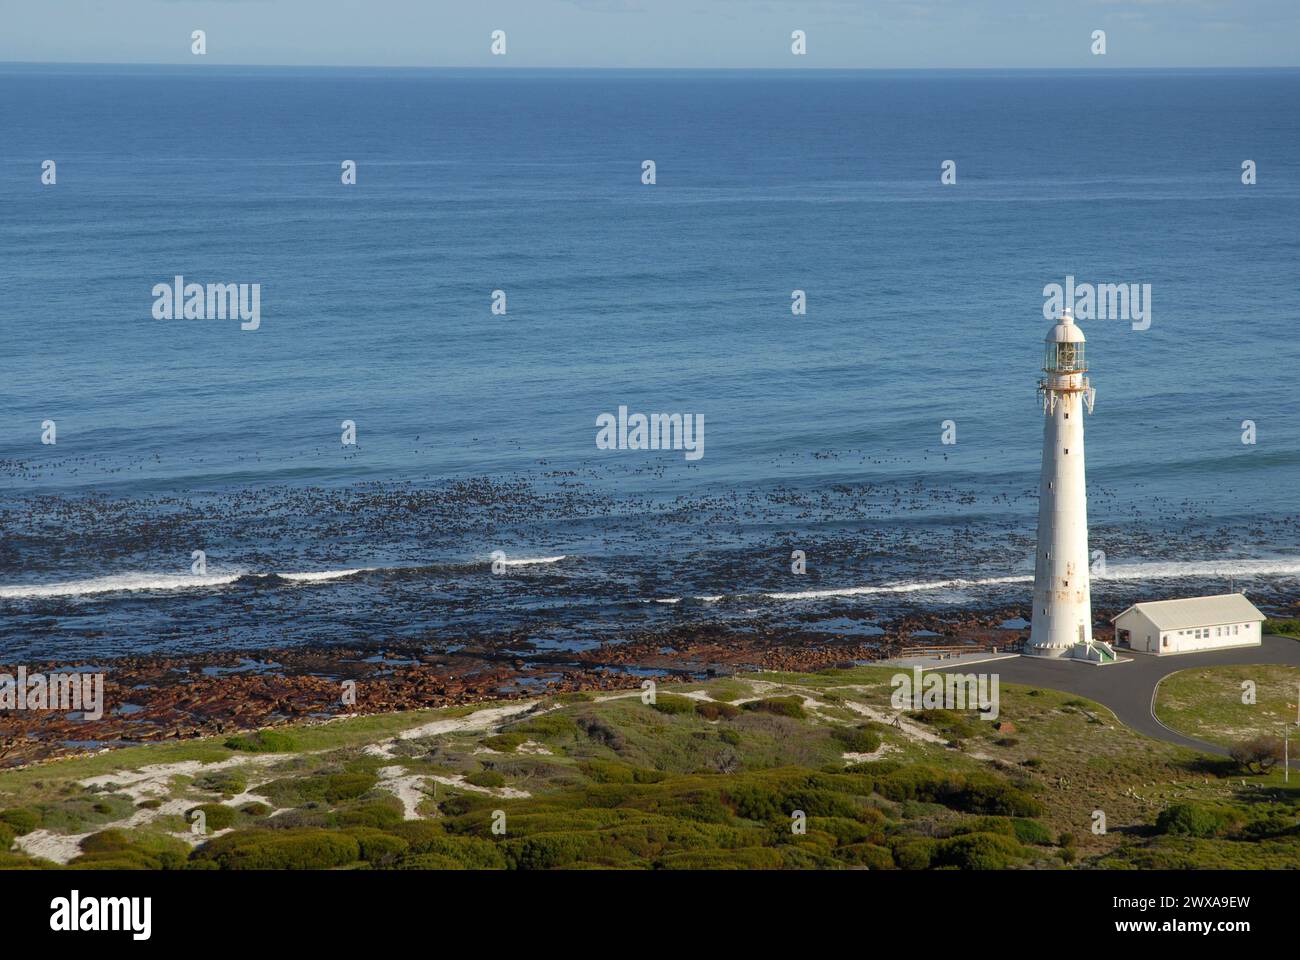 Slangkop Lighthouse and Western Cape coast with  view over sea to horizon, Kommetjie,  Cape Town, South Africa Stock Photo